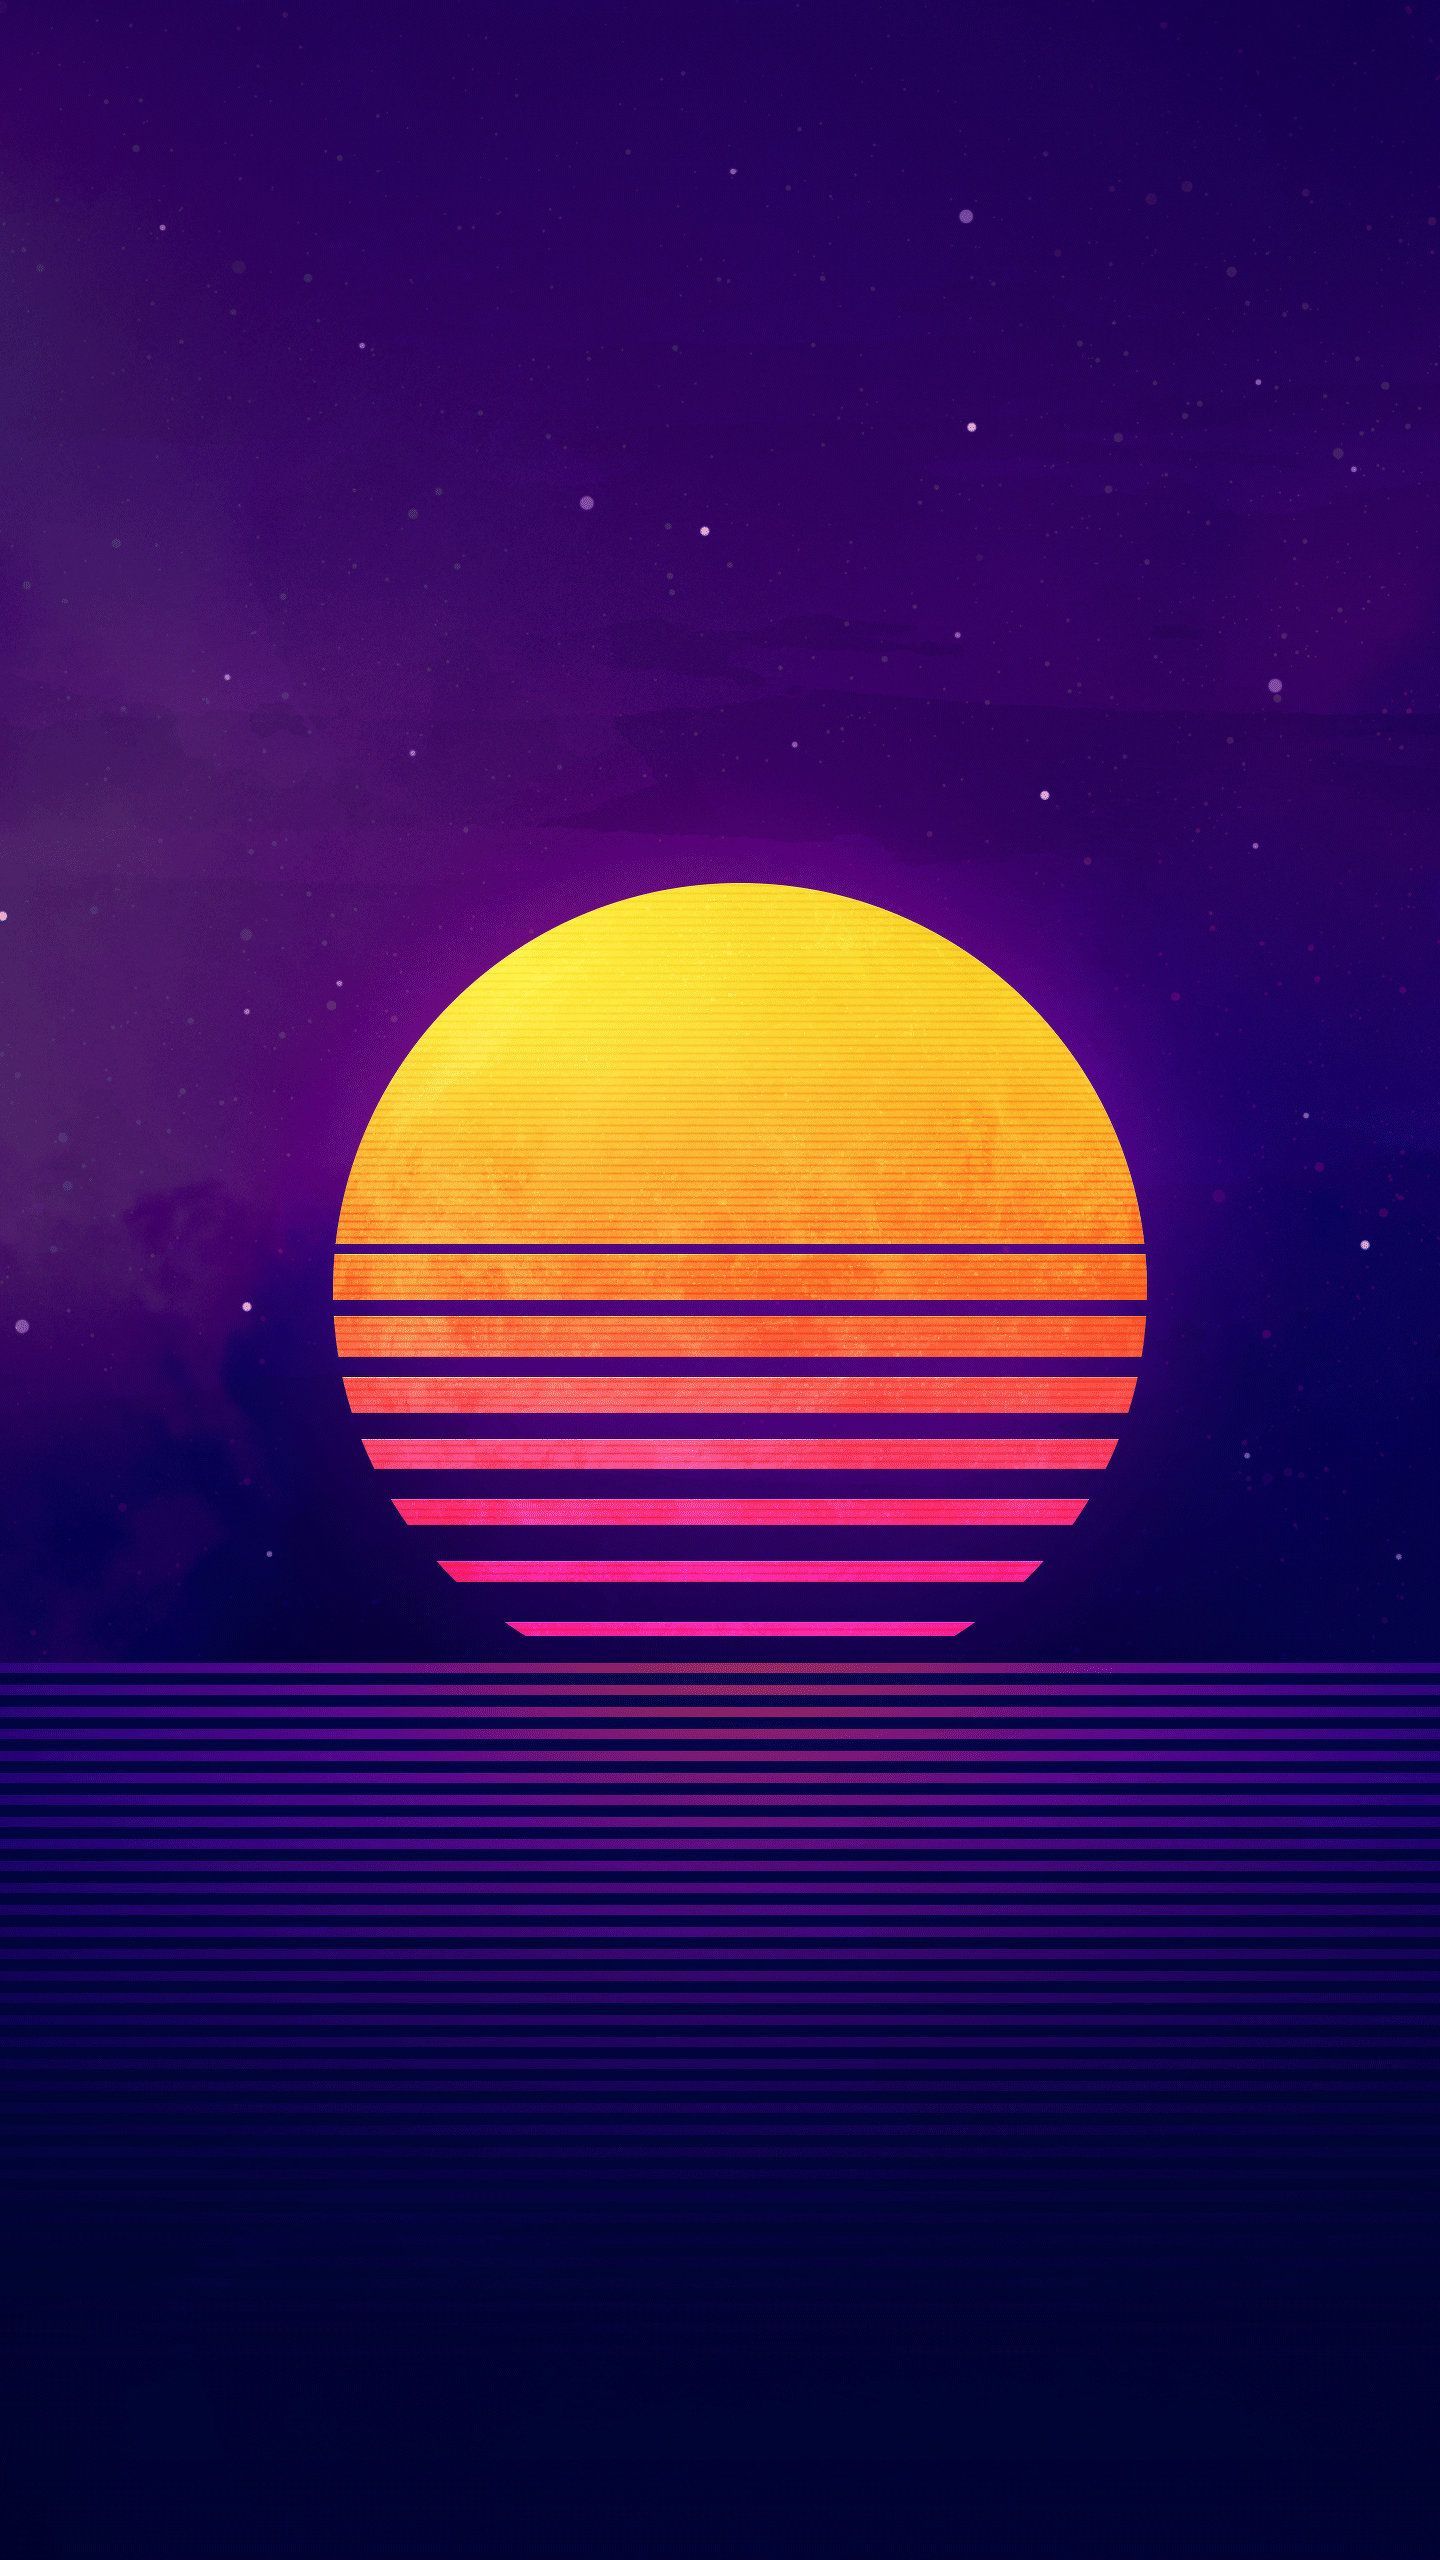 Retrowave Sunset, HD Artist Wallpaper Photo and Picture